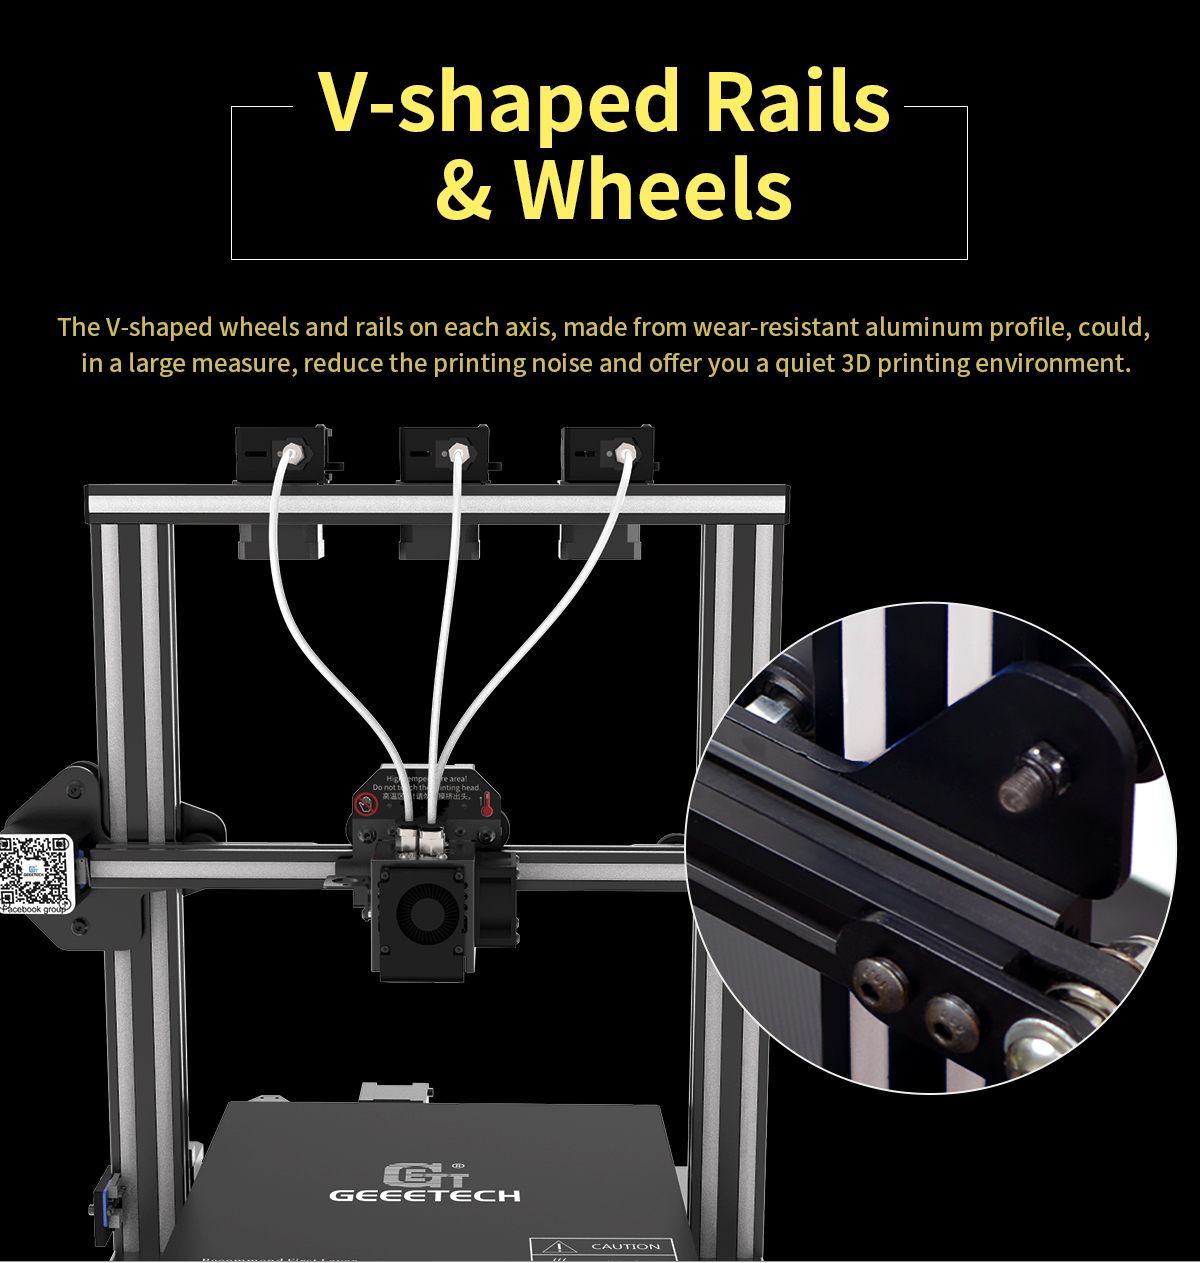 geeetech a20t description of V-shaped rails and wheels